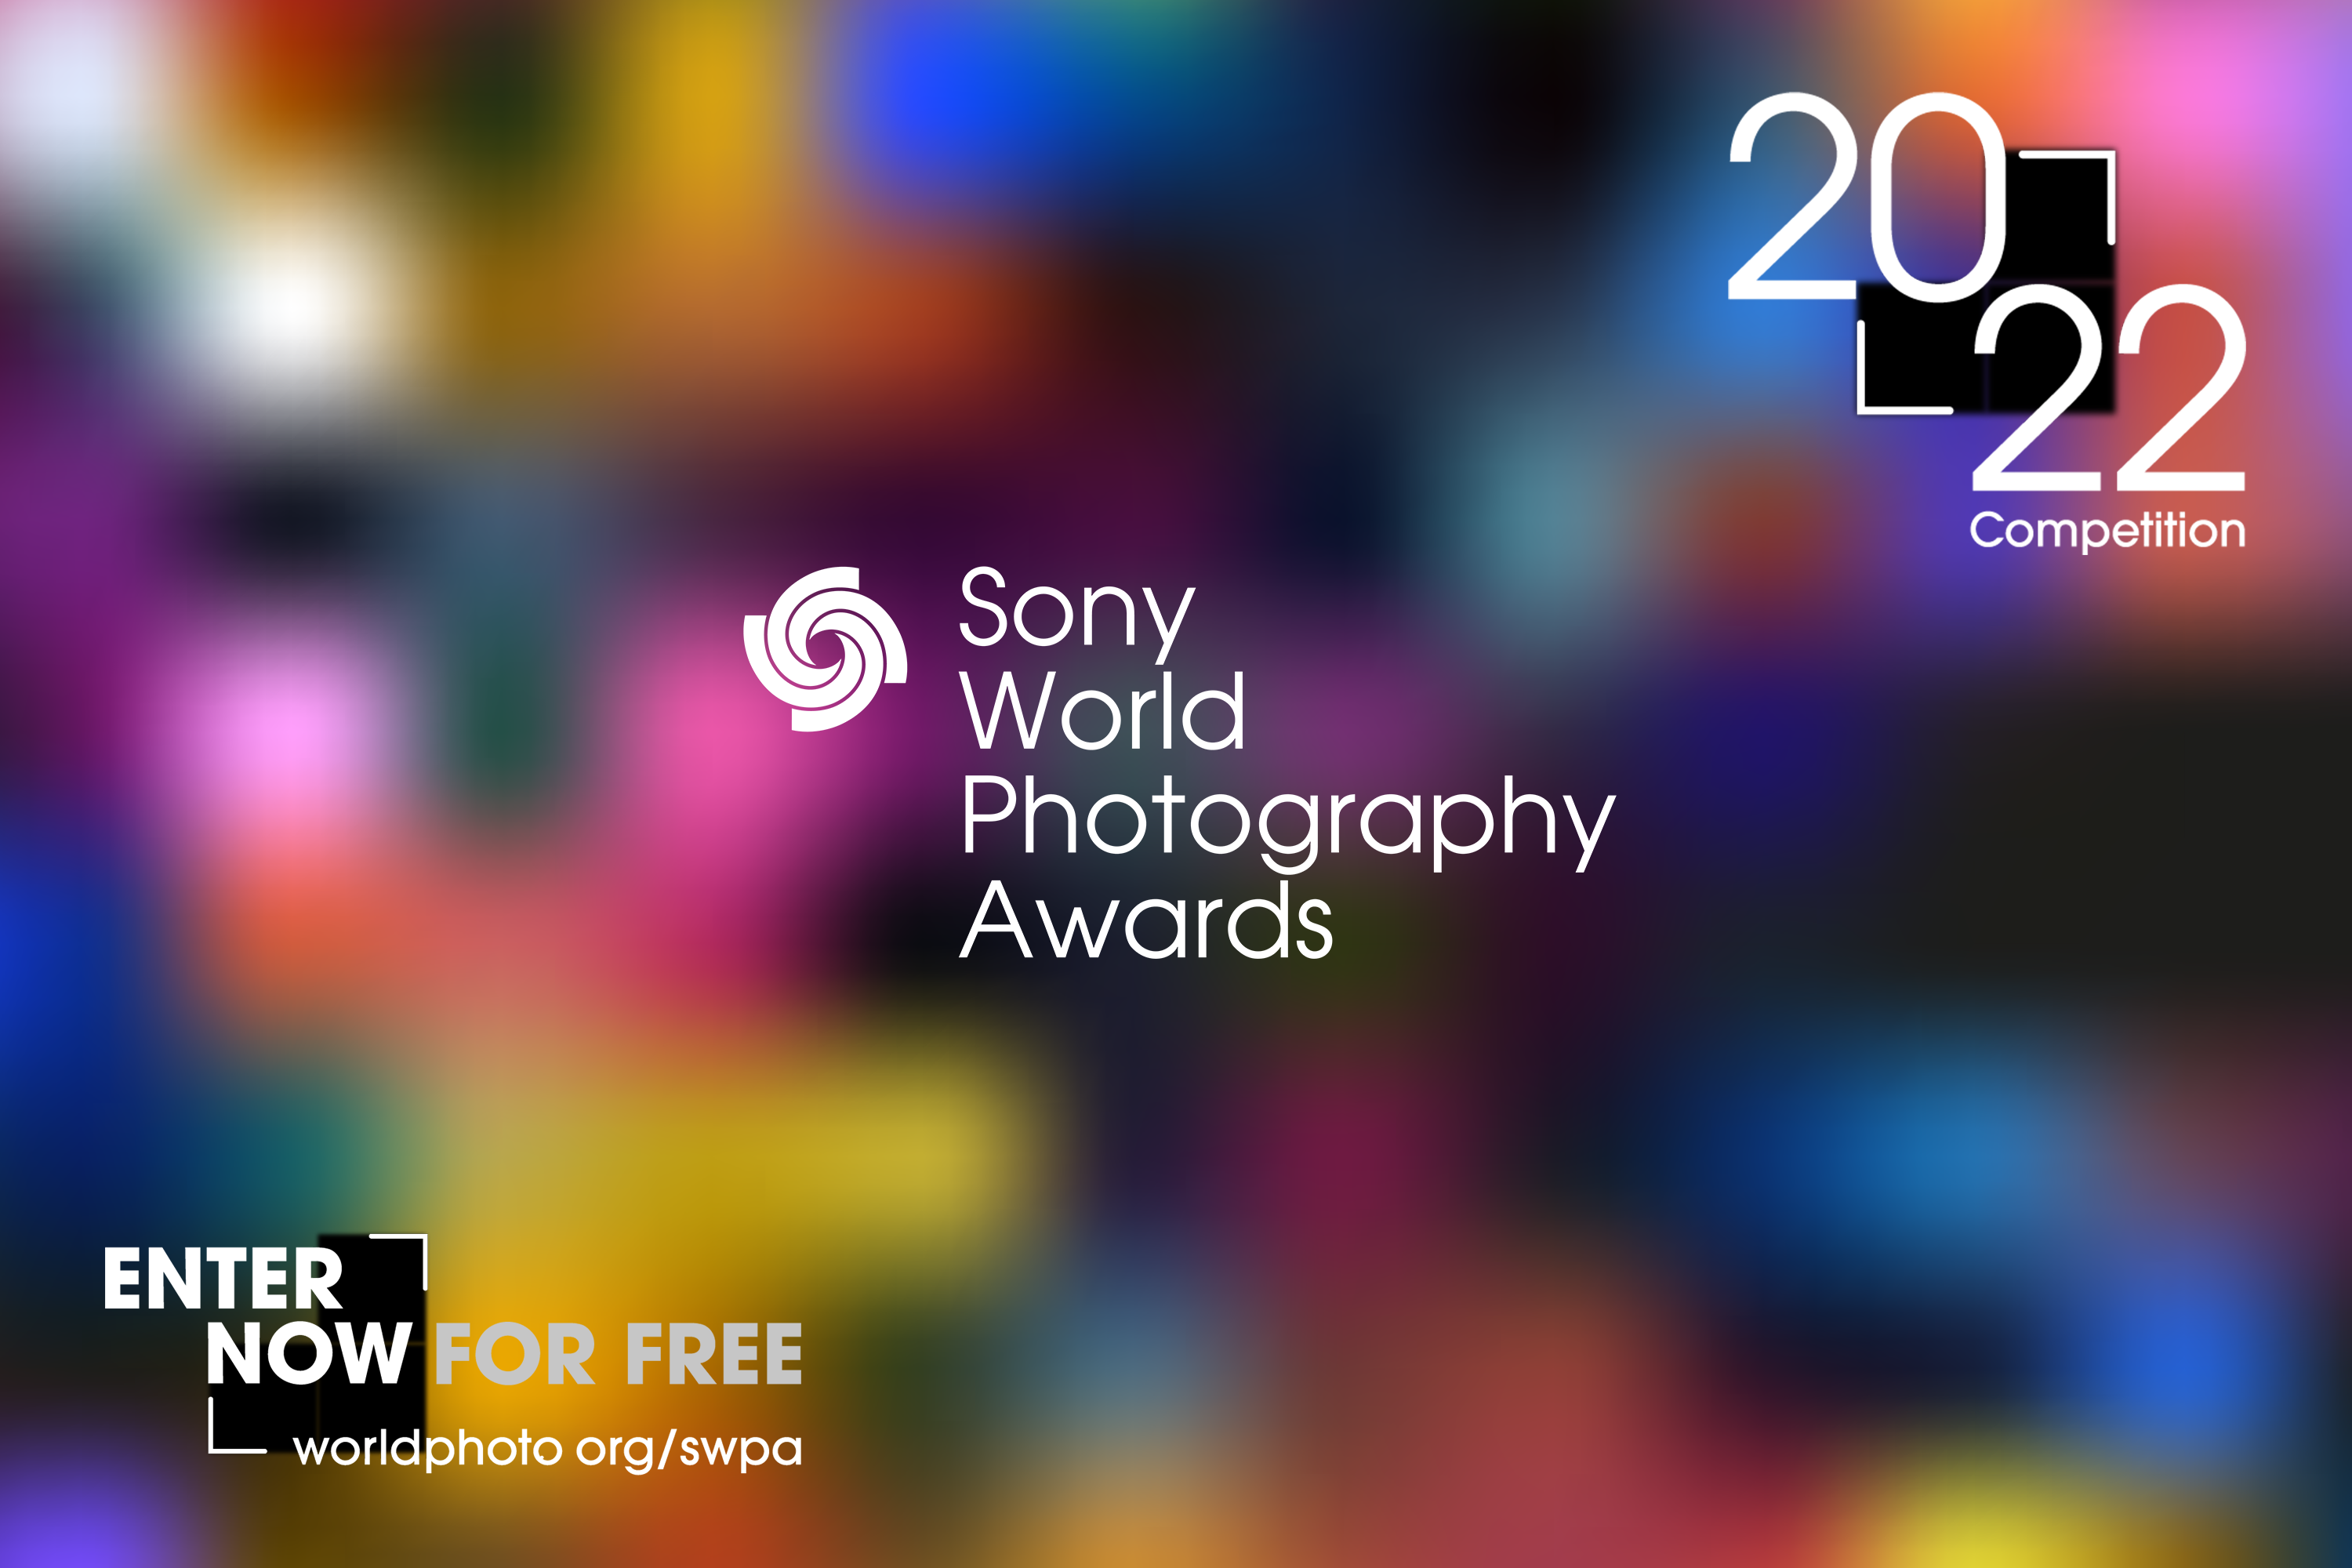 Get Free Entries in the Sony World Photography Awards with Our Code